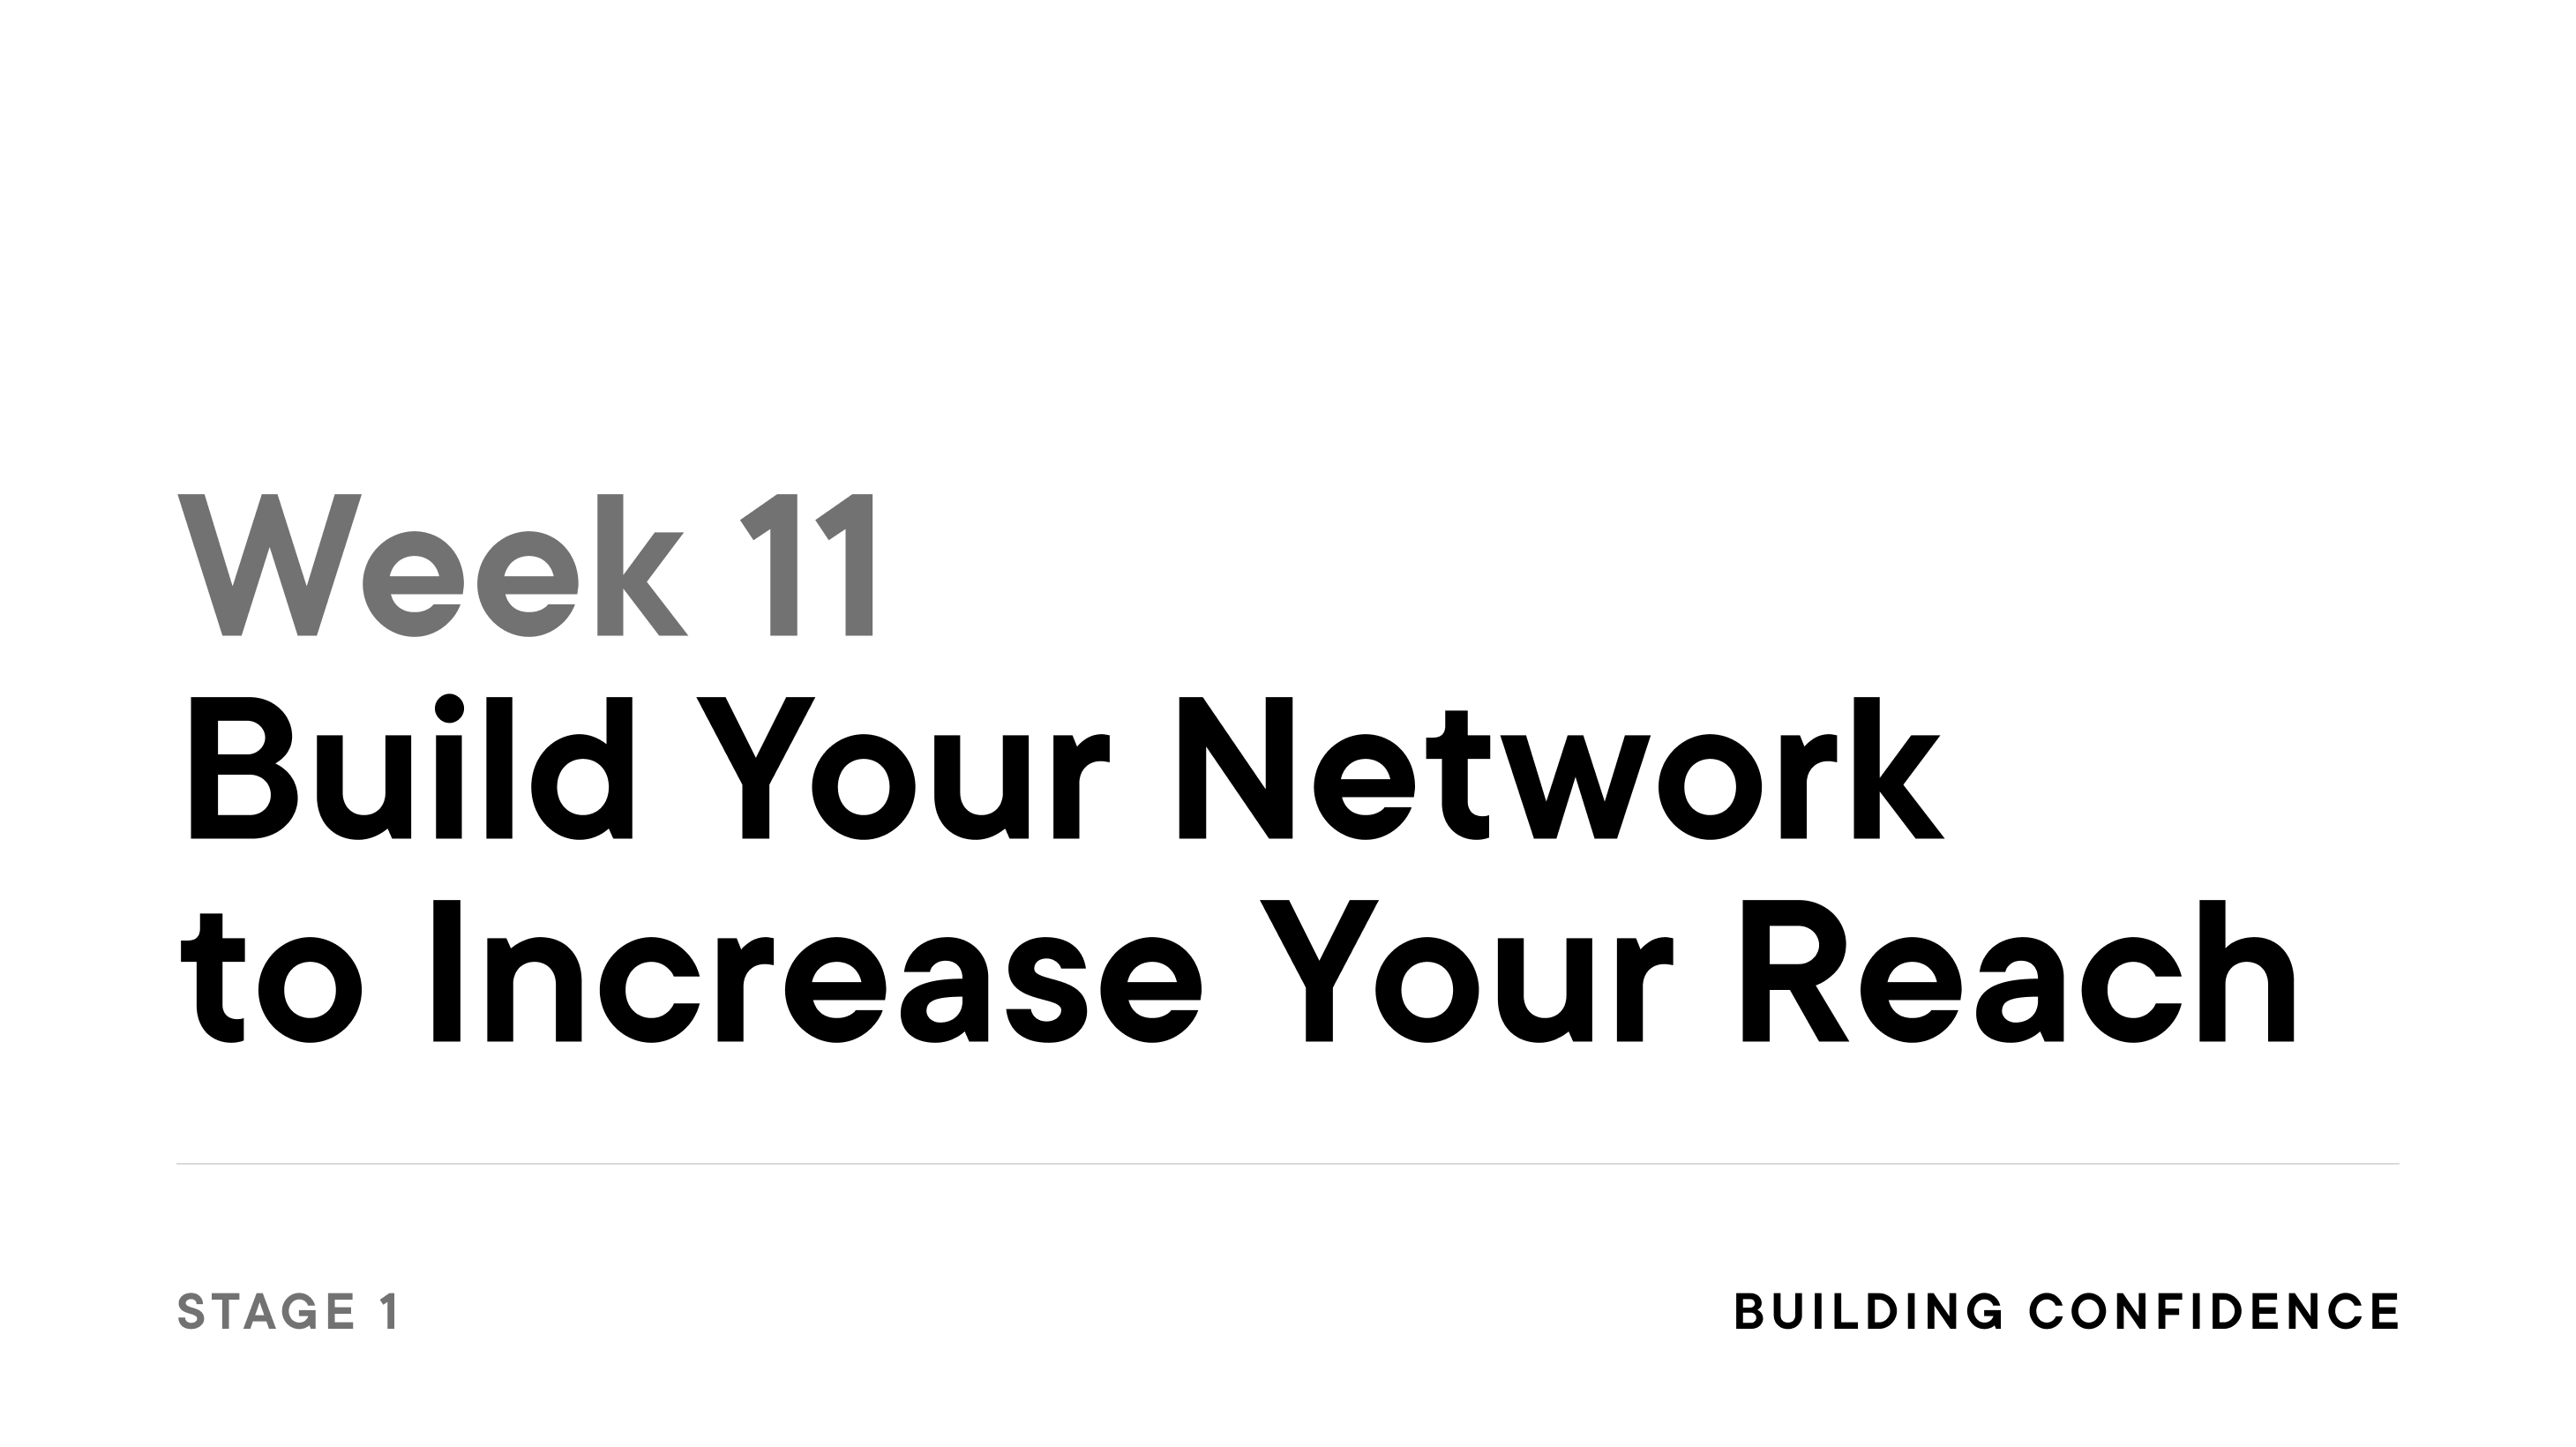 Week 11: Build Your Network to Increase Your Reach